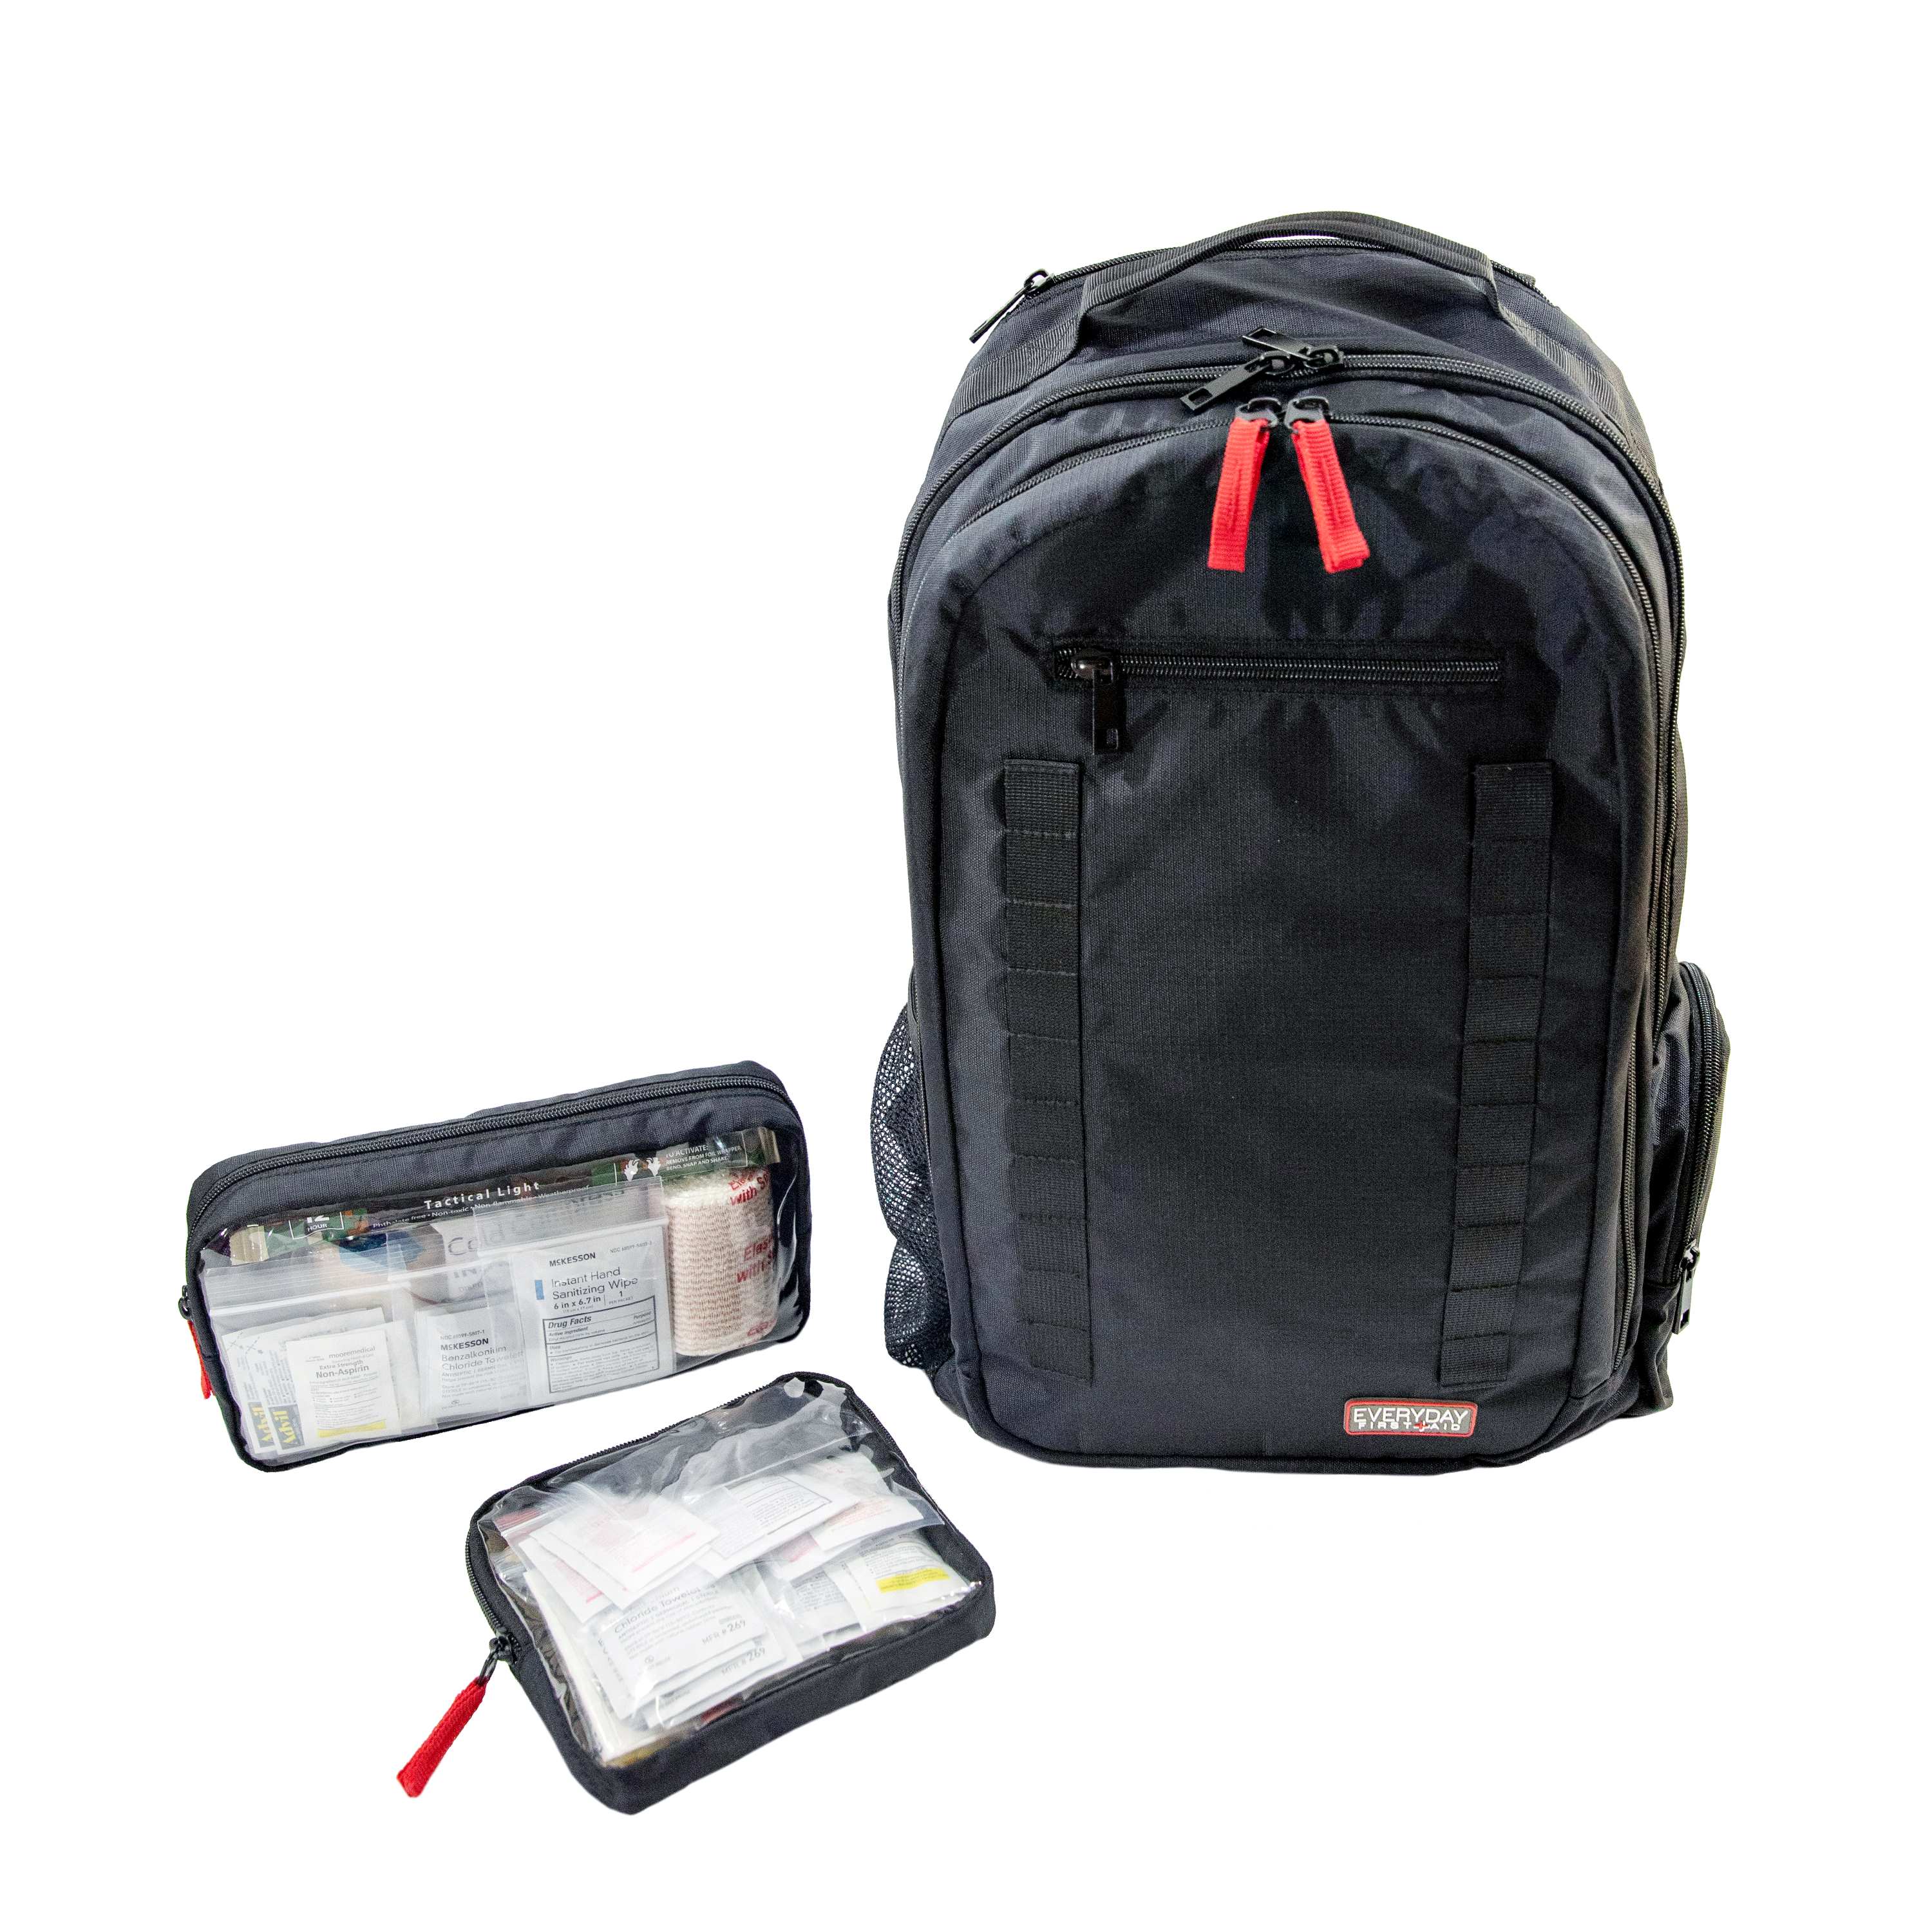 Base first aid kit backpack with pouches out